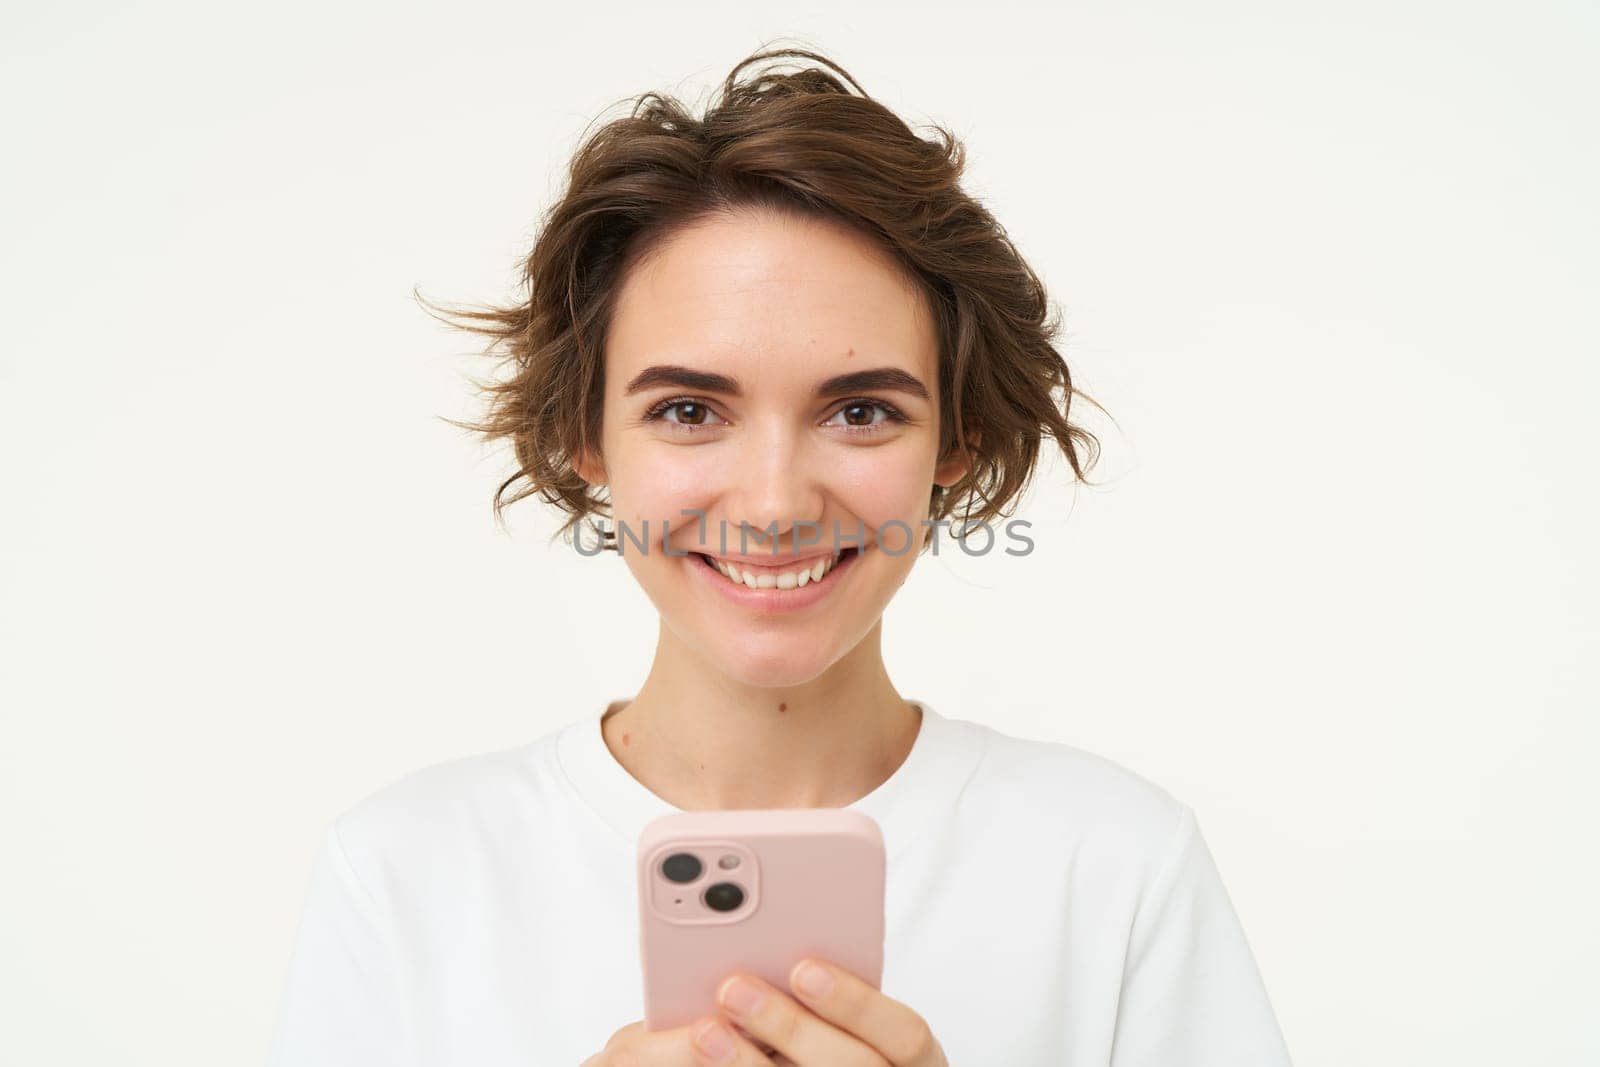 Technology concept. Young woman using her mobile phone, holding smartphone and smiling, using app, browsing social media, doing online shopping, isolated over white background.